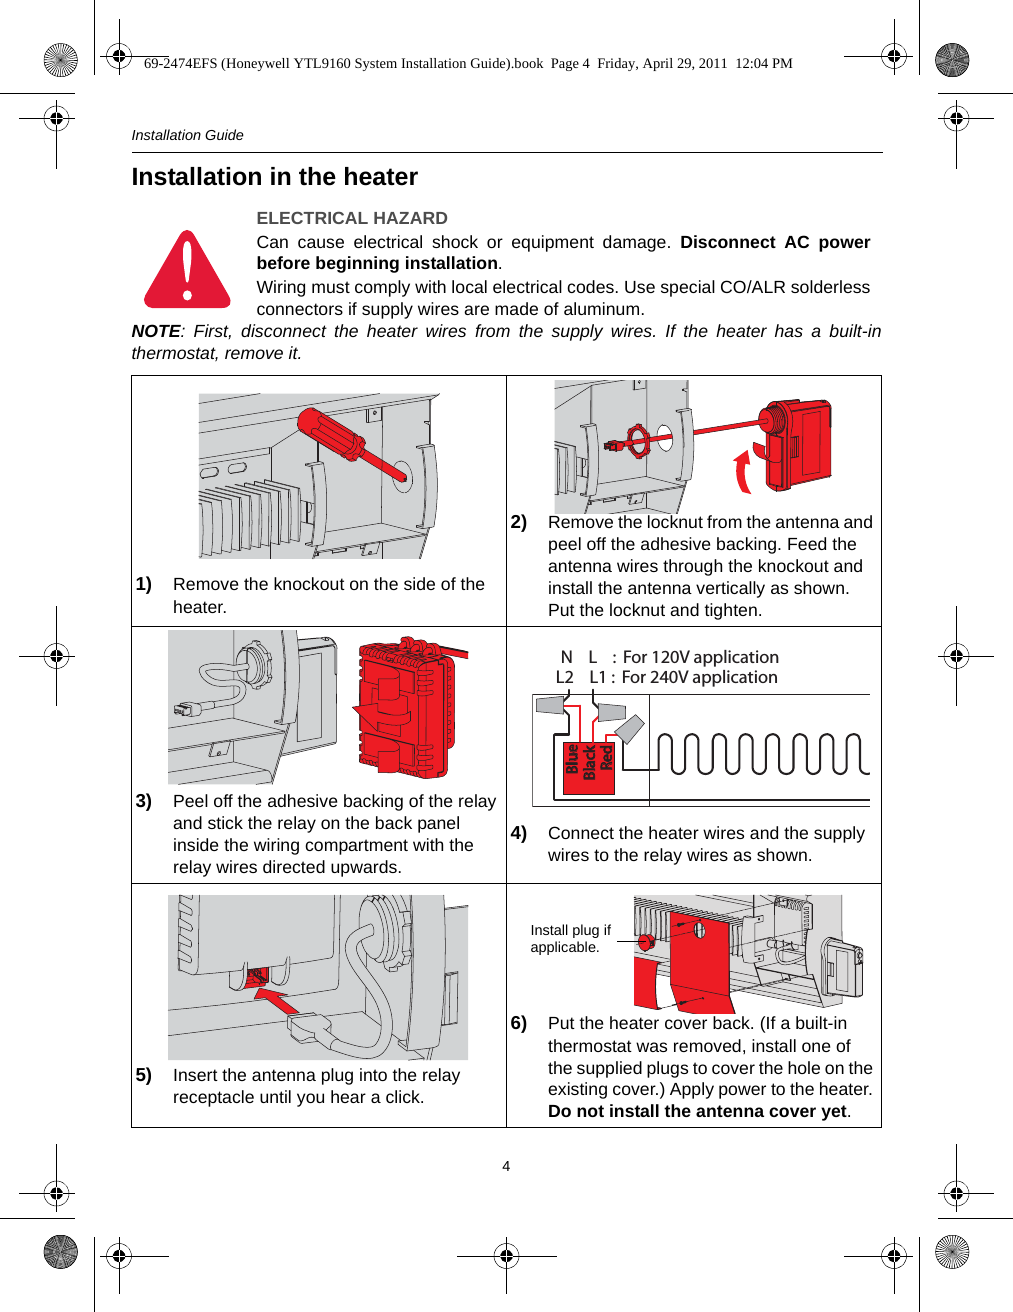 Installation Guide4Installation in the heaterNOTE: First, disconnect the heater wires from the supply wires. If the heater has a built-inthermostat, remove it.ELECTRICAL HAZARDCan cause electrical shock or equipment damage. Disconnect AC powerbefore beginning installation.Wiring must comply with local electrical codes. Use special CO/ALR solderlessconnectors if supply wires are made of aluminum.1) Remove the knockout on the side of the heater.2) Remove the locknut from the antenna and peel off the adhesive backing. Feed the antenna wires through the knockout and install the antenna vertically as shown. Put the locknut and tighten.3) Peel off the adhesive backing of the relay and stick the relay on the back panel inside the wiring compartment with the relay wires directed upwards. 4) Connect the heater wires and the supply wires to the relay wires as shown.5) Insert the antenna plug into the relay receptacle until you hear a click.6) Put the heater cover back. (If a built-in thermostat was removed, install one of the supplied plugs to cover the hole on the existing cover.) Apply power to the heater. Do not install the antenna cover yet.L2    L1 :  For 240V applicationN    L    :  For 120V applicationBlueBlueBlackBlackRedRedInstall plug if applicable.69-2474EFS (Honeywell YTL9160 System Installation Guide).book  Page 4  Friday, April 29, 2011  12:04 PM